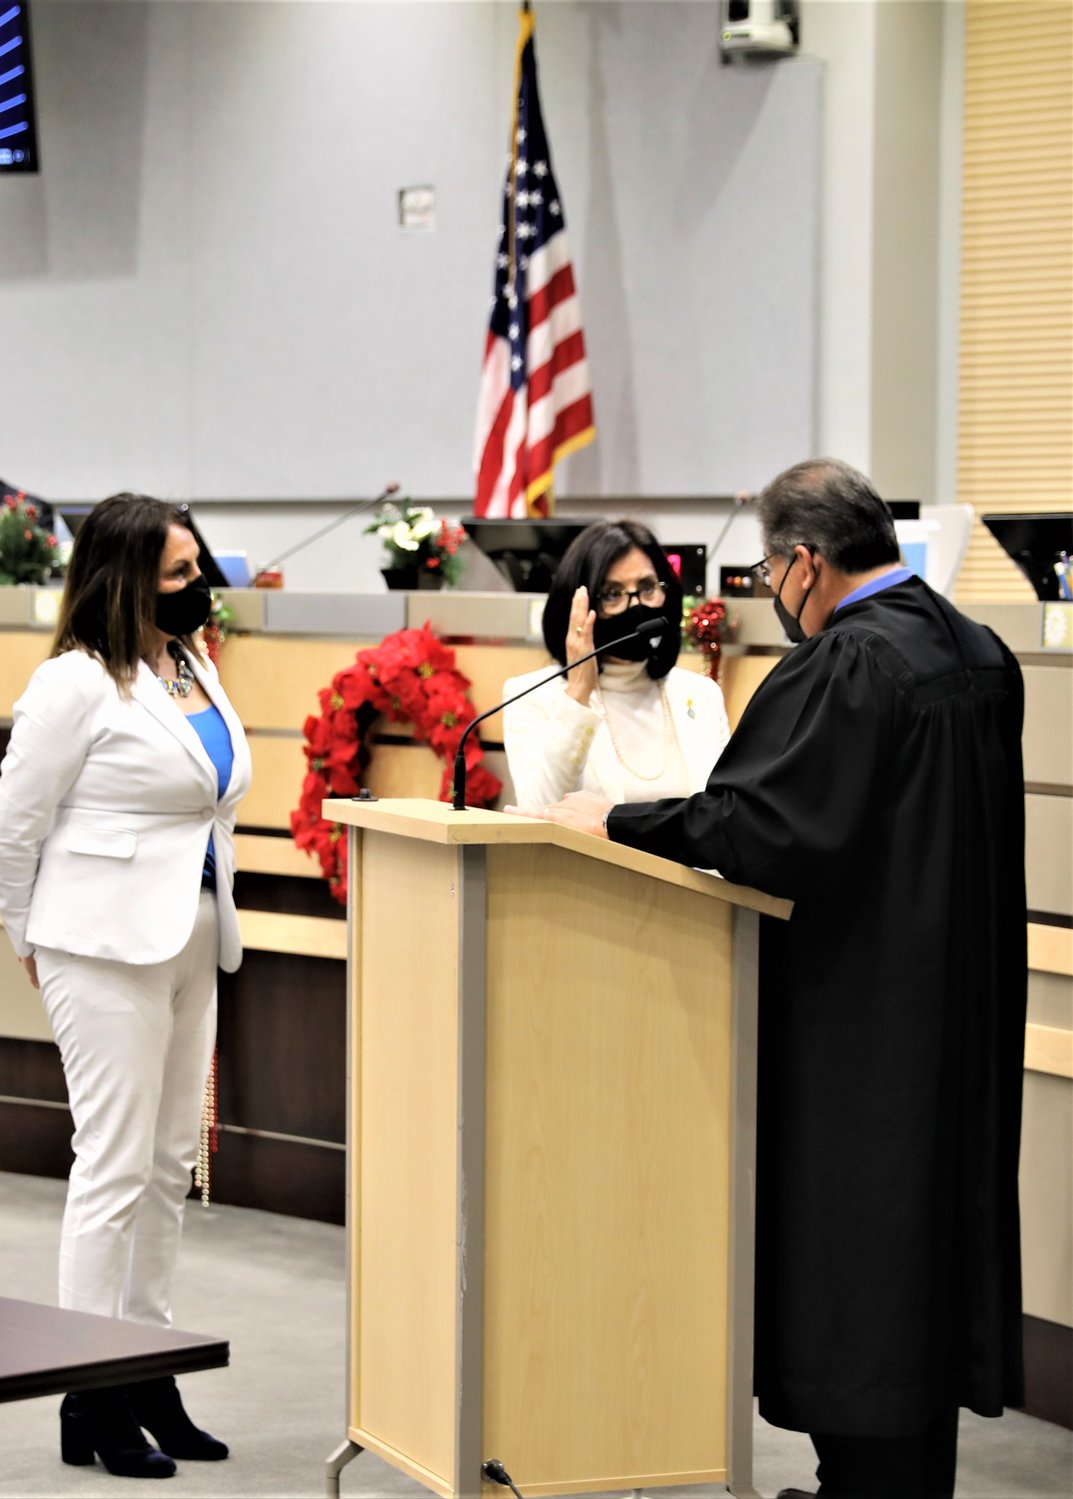 Las Cruces City Councilor Yvonne Flores was sworn in for a second four-year term on the council Dec. 21 by Third Judicial District Judge Conrad Perea. Flores is shown with Mayor Pro Tempore Kassandra Gandara.